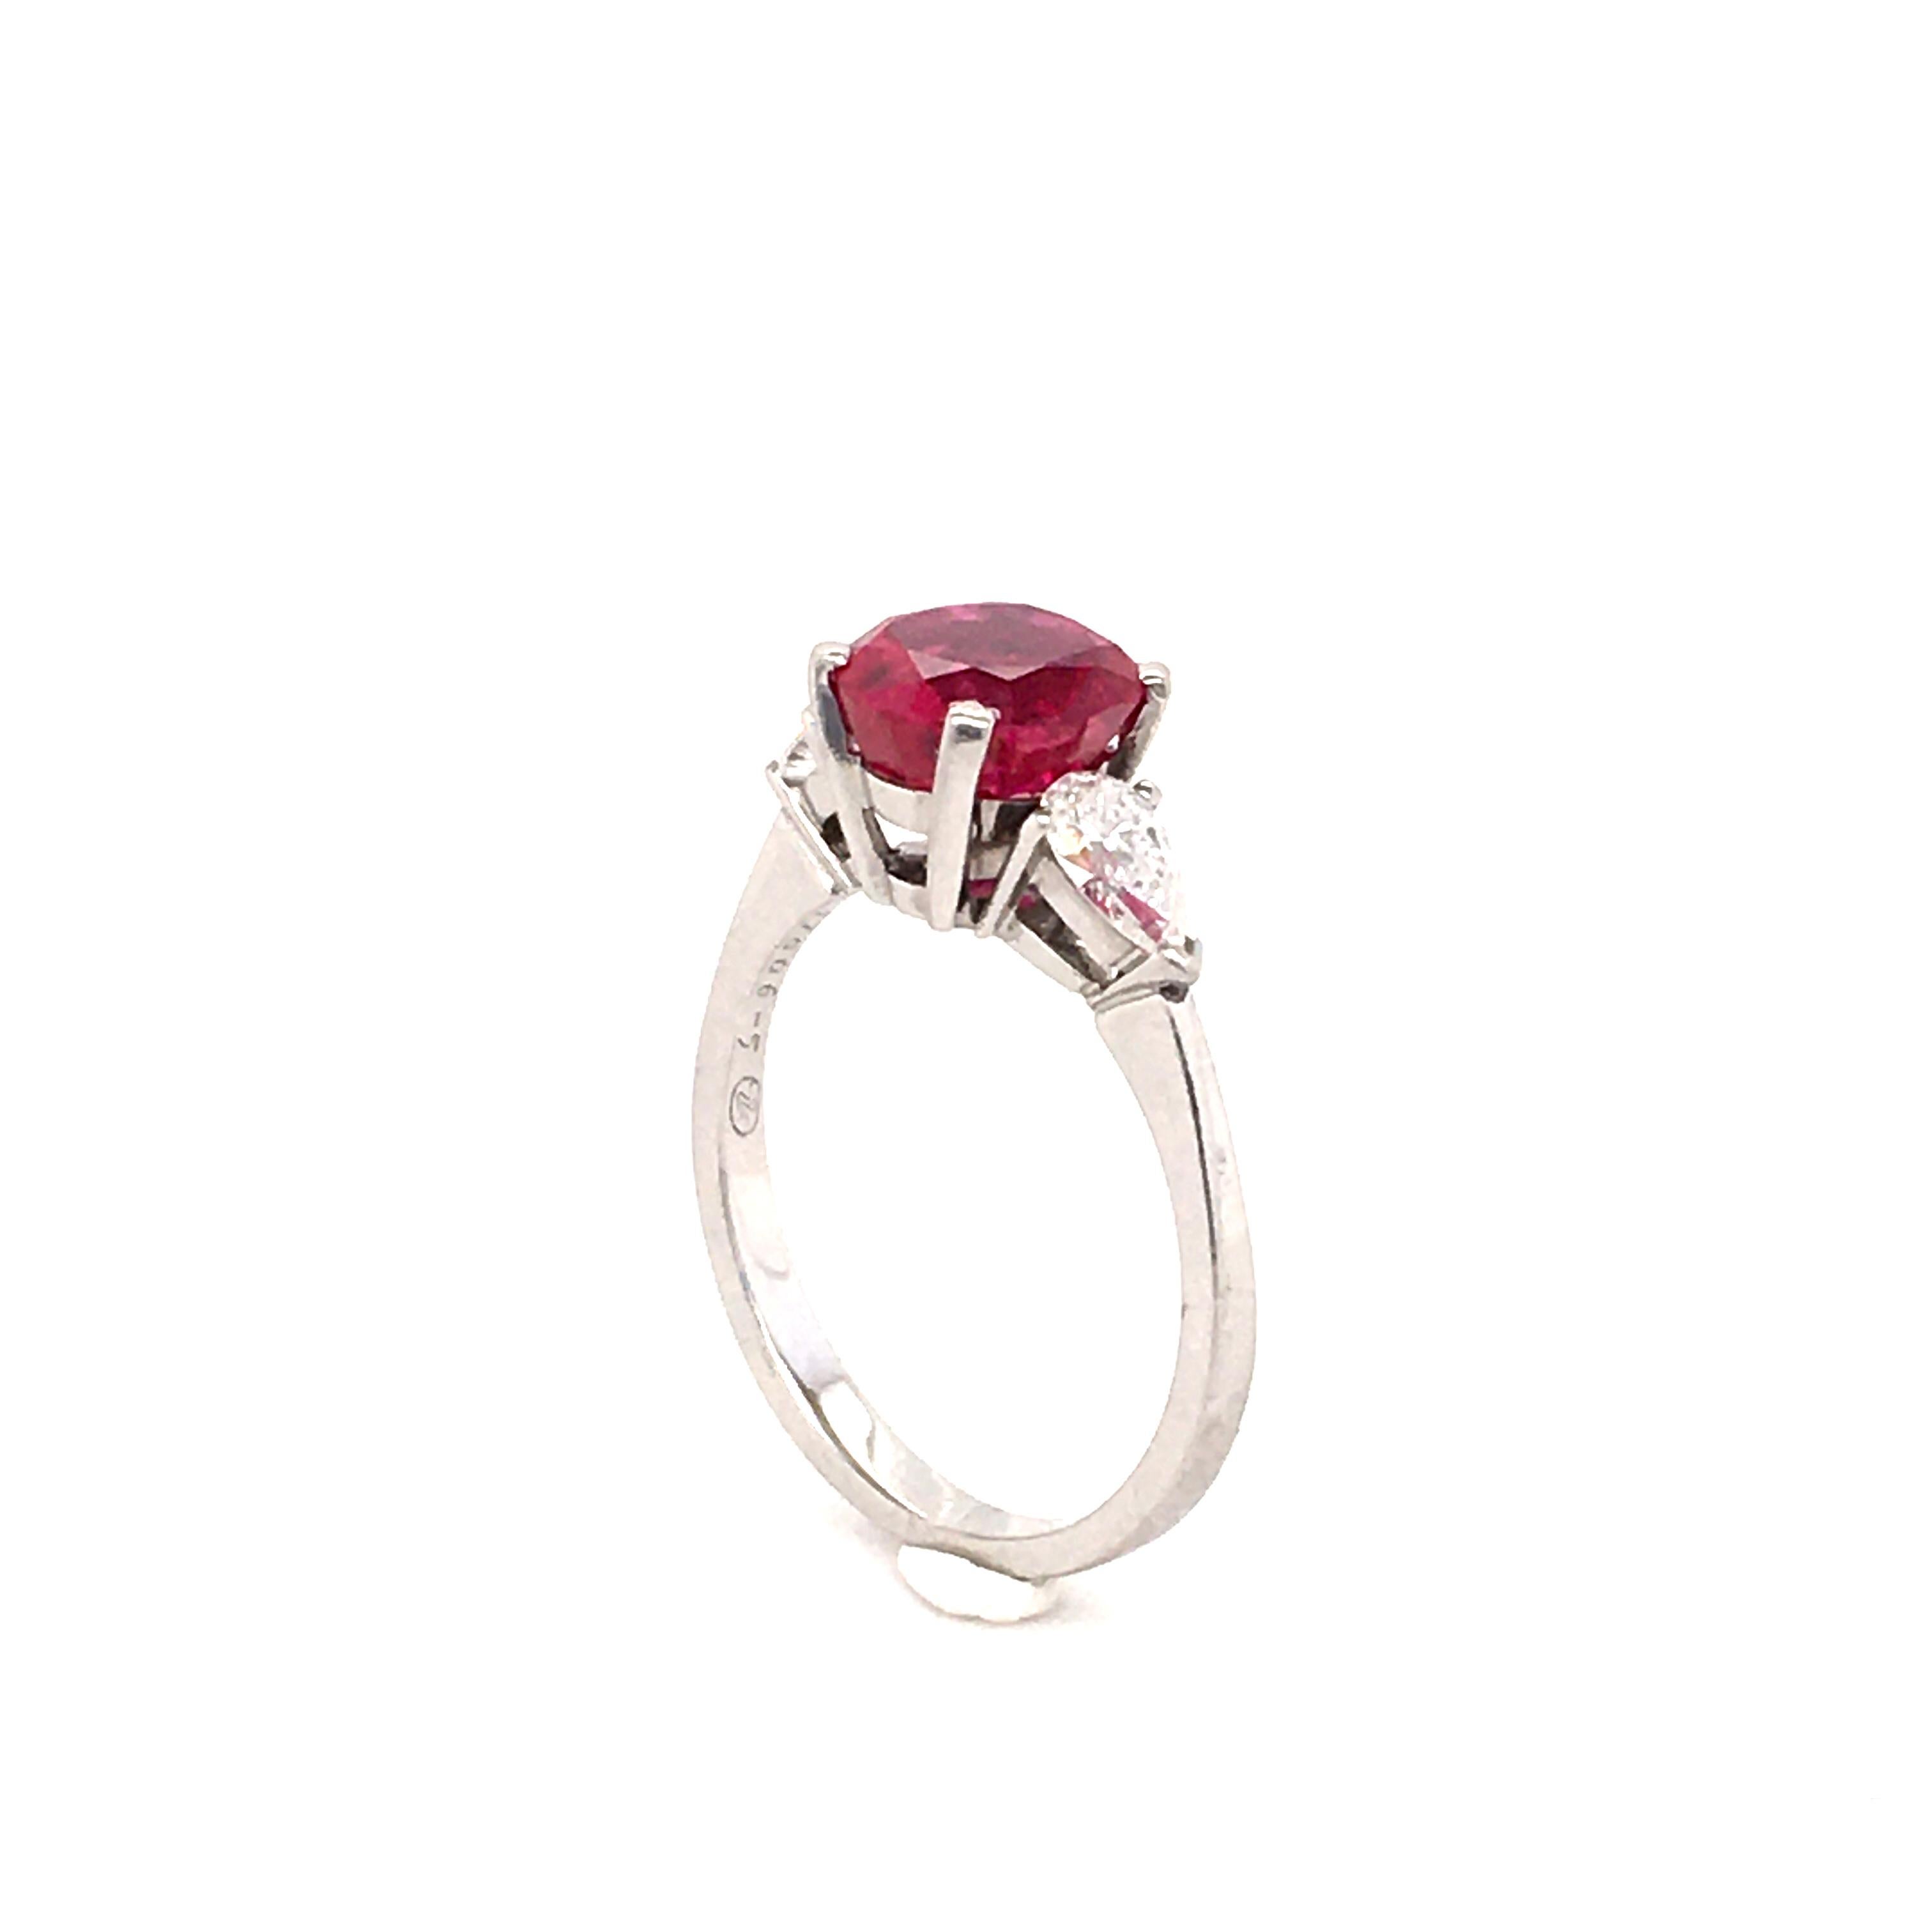 Cushion Cut Superb Gubelin Ring with a 2.35 Carat Untreated Burmese Ruby and Diamonds